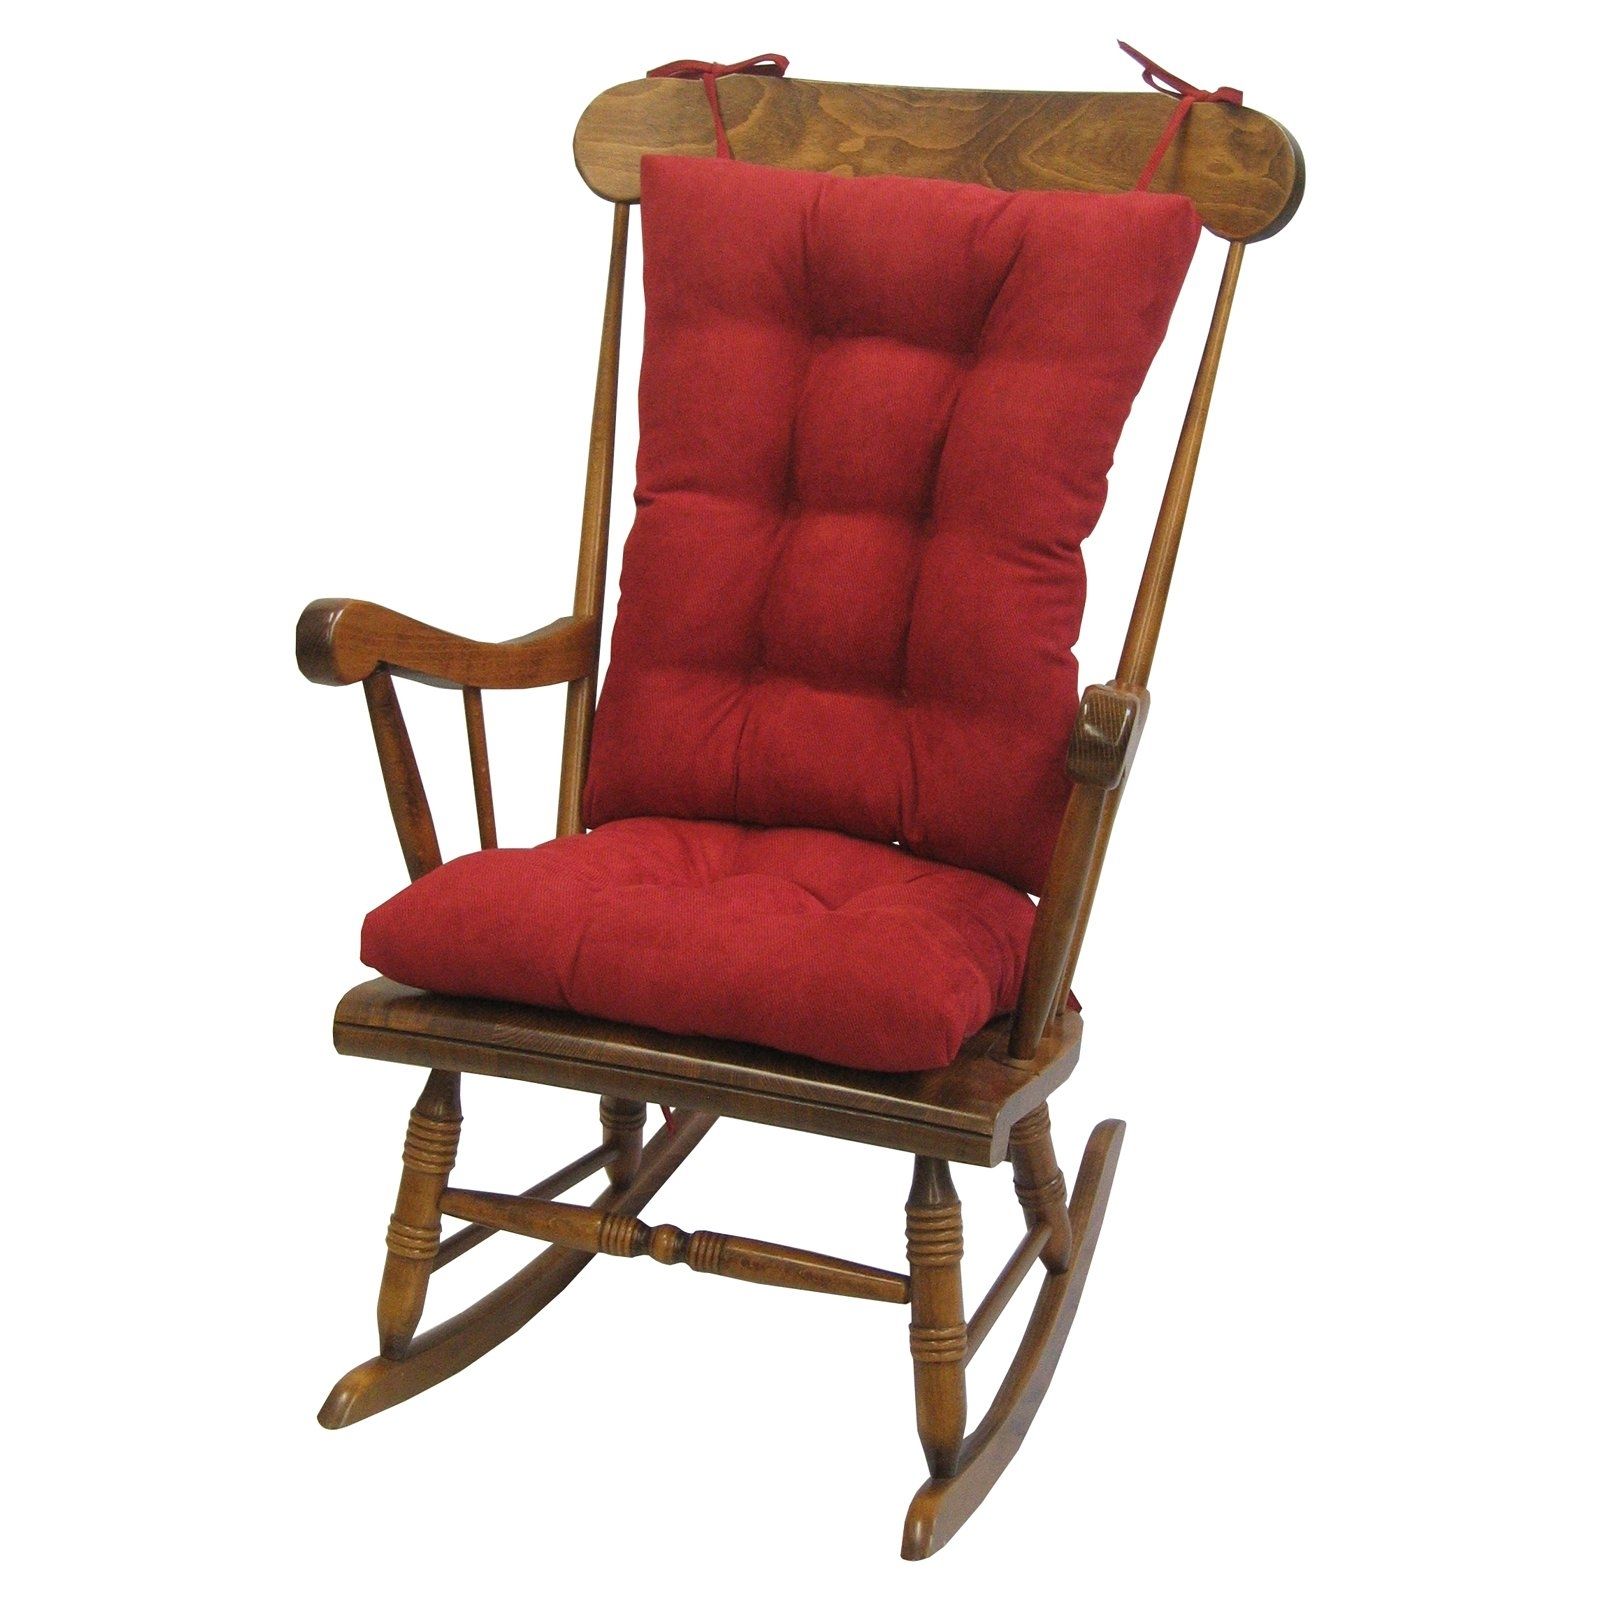 Most Recent Rocking Chairs With Cushions Inside Gripper Jumbo Rocking Chair Cushions, Nouveau – Walmart (View 3 of 15)